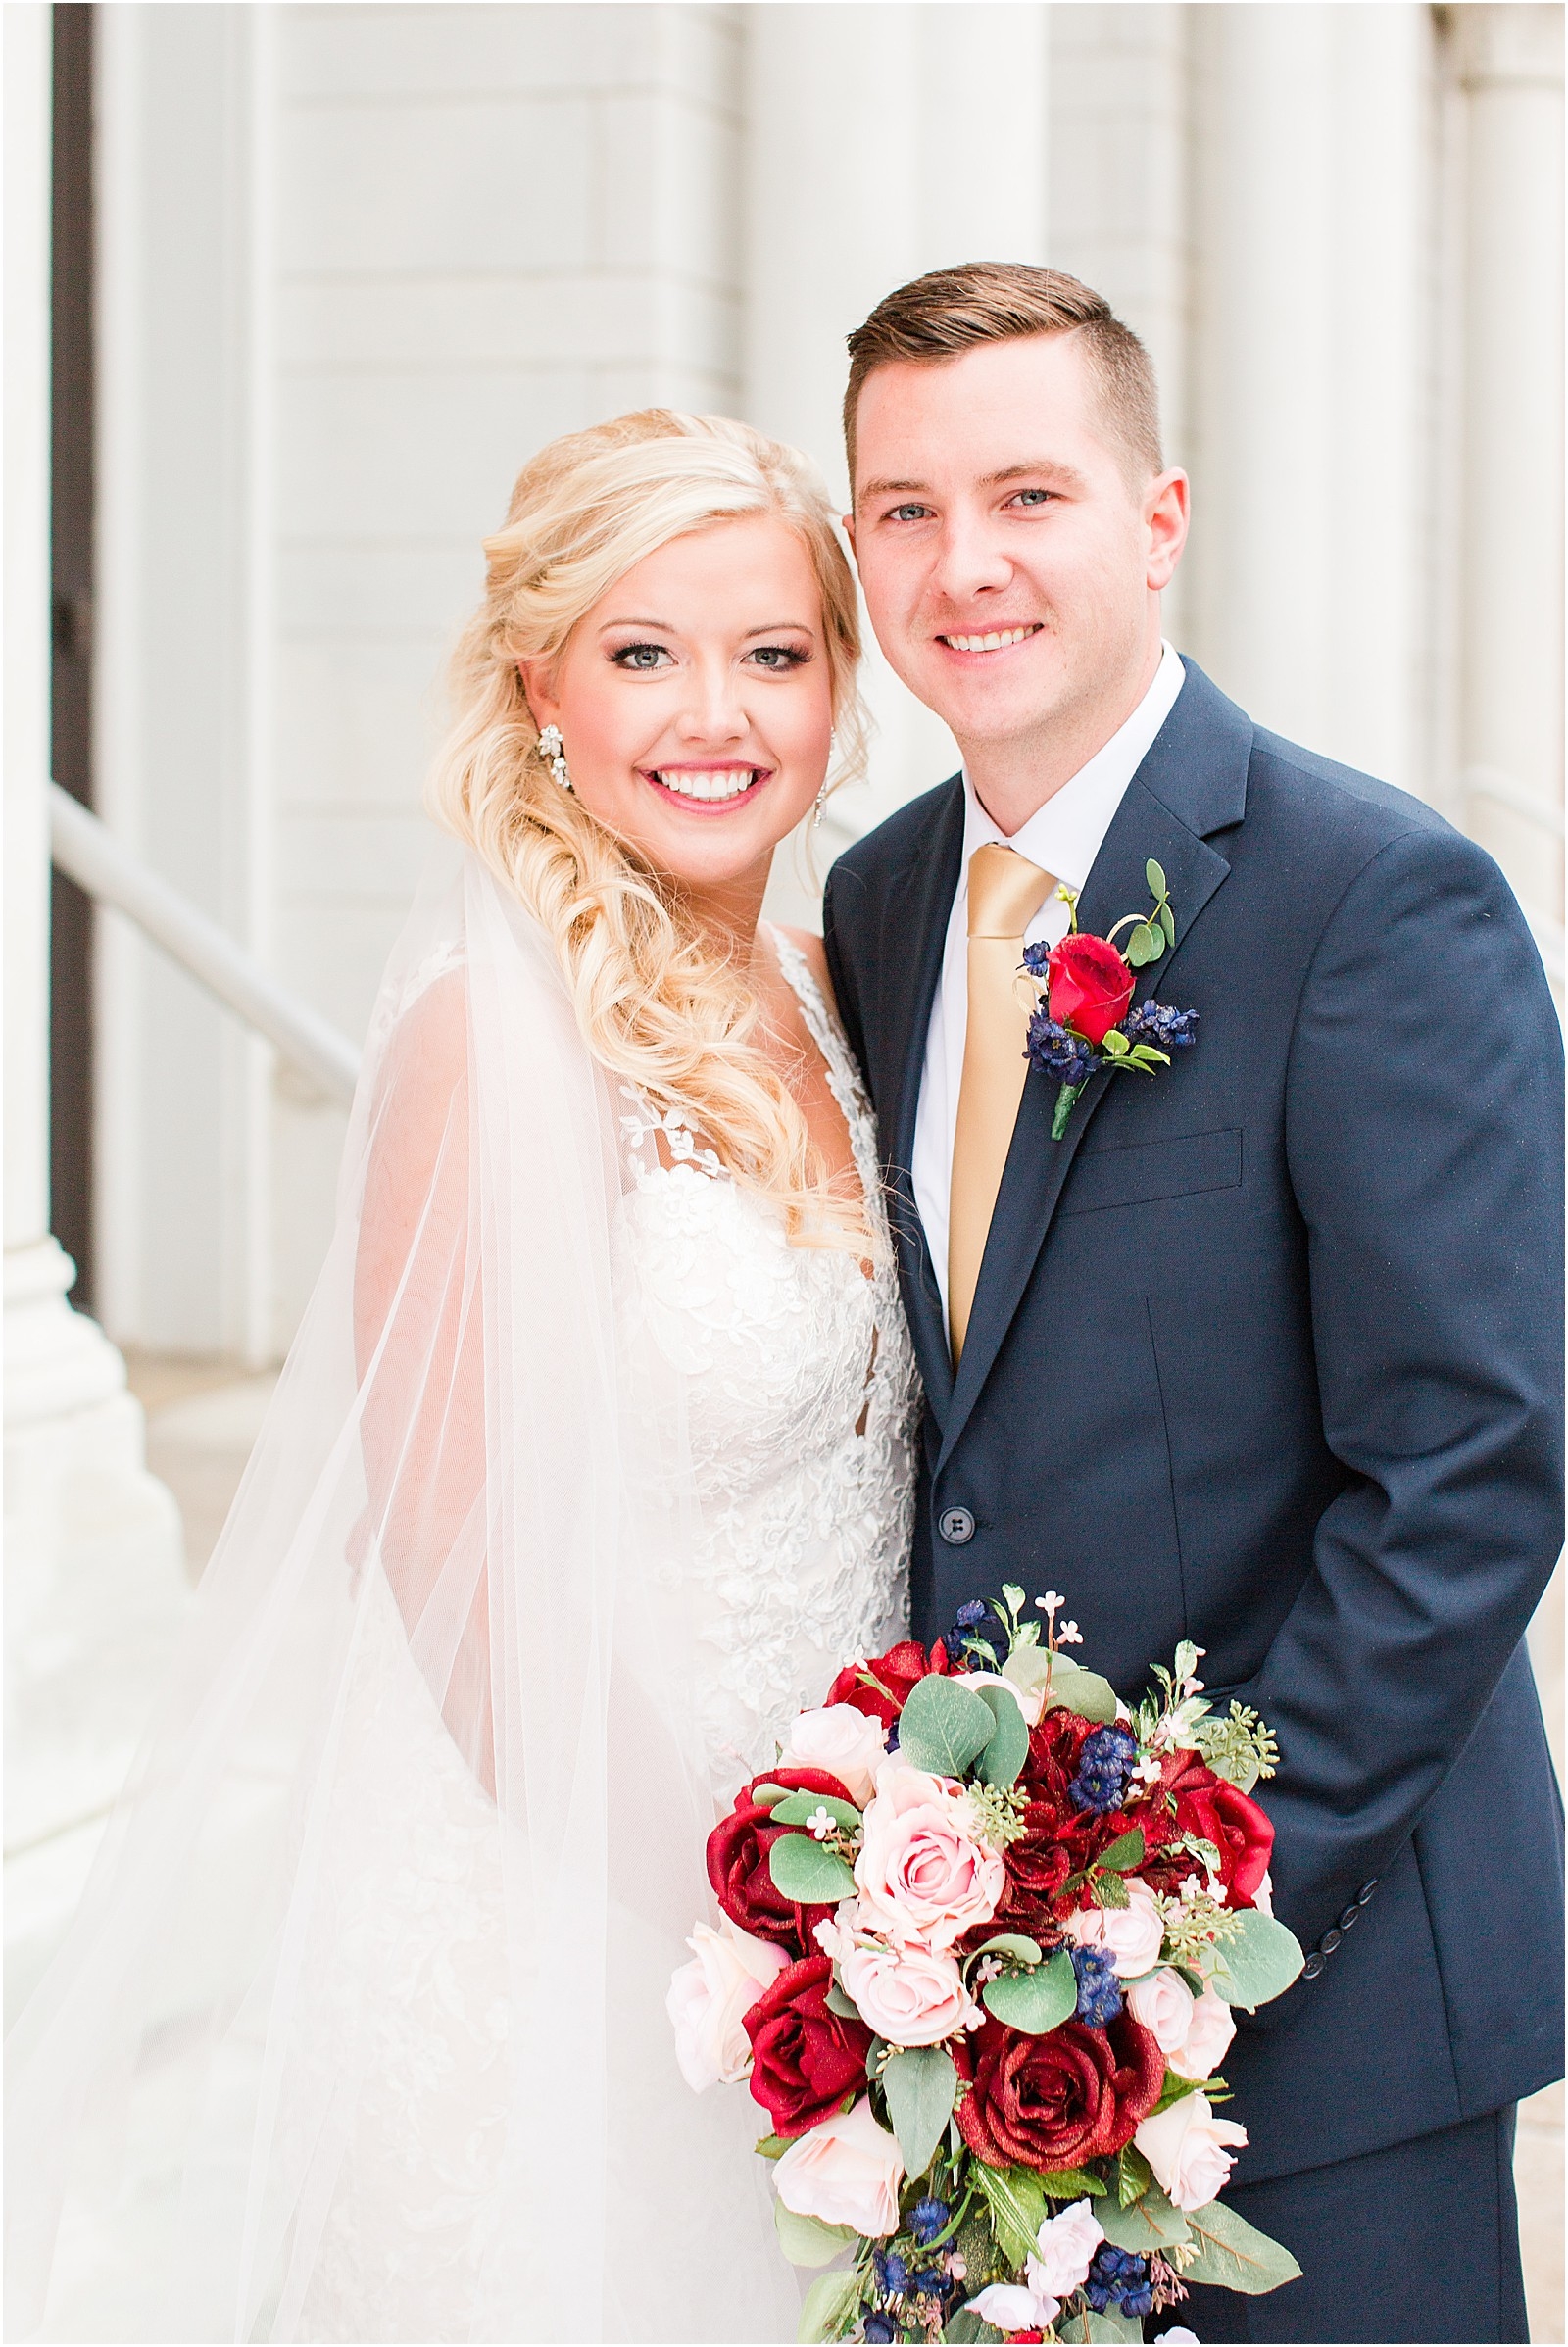 Haylee and Dillon's Evansville, Indiana wedding by Bret and Brandie Photography.0066.jpg